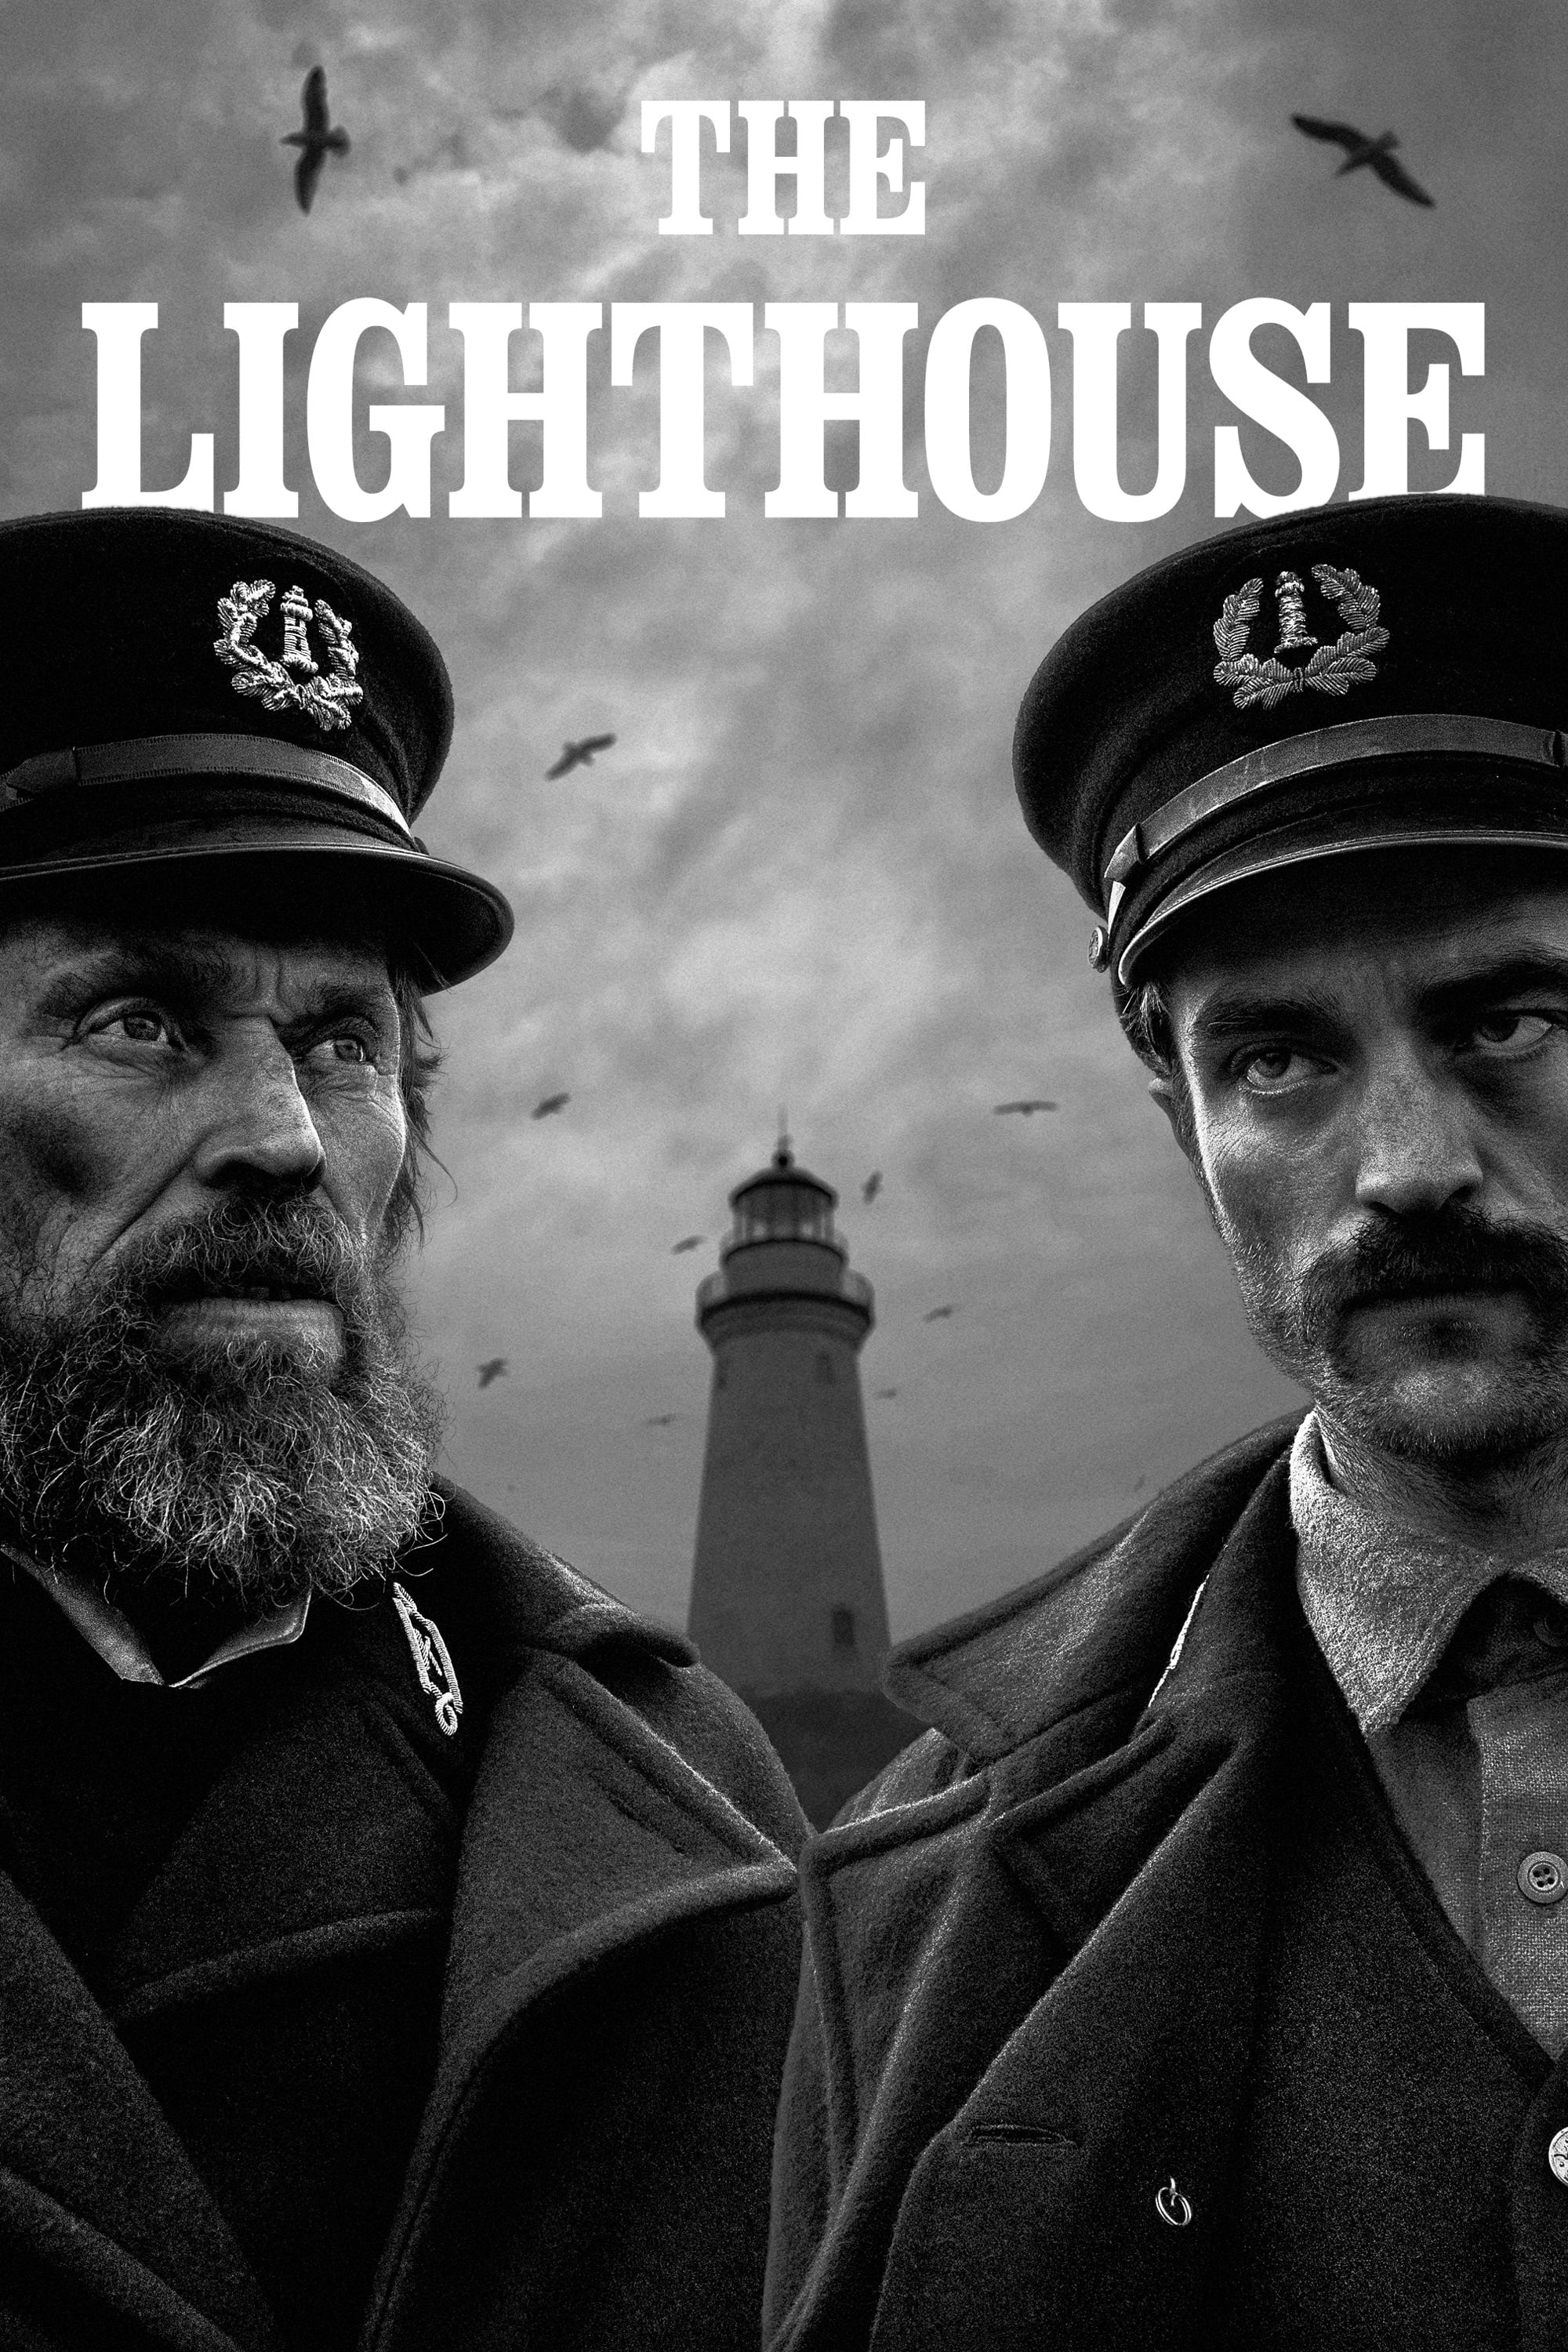 movie about lighthouse keeper